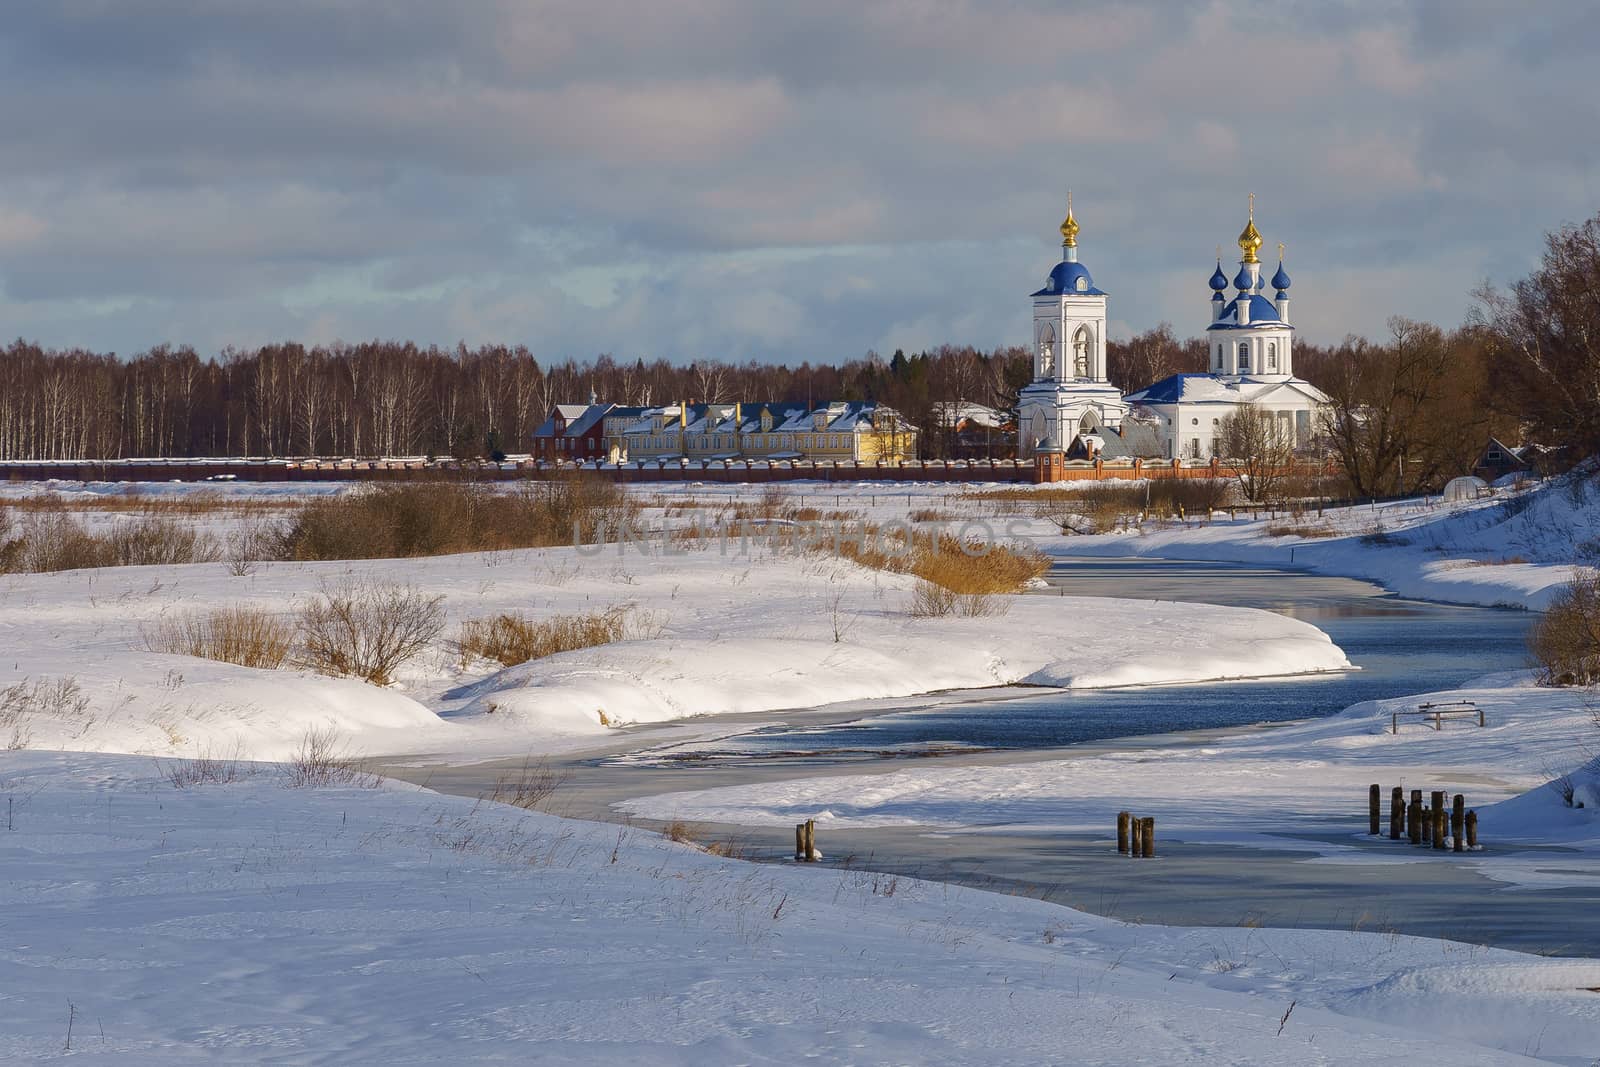 church in a snowy field on a river bank on a winter day by VADIM